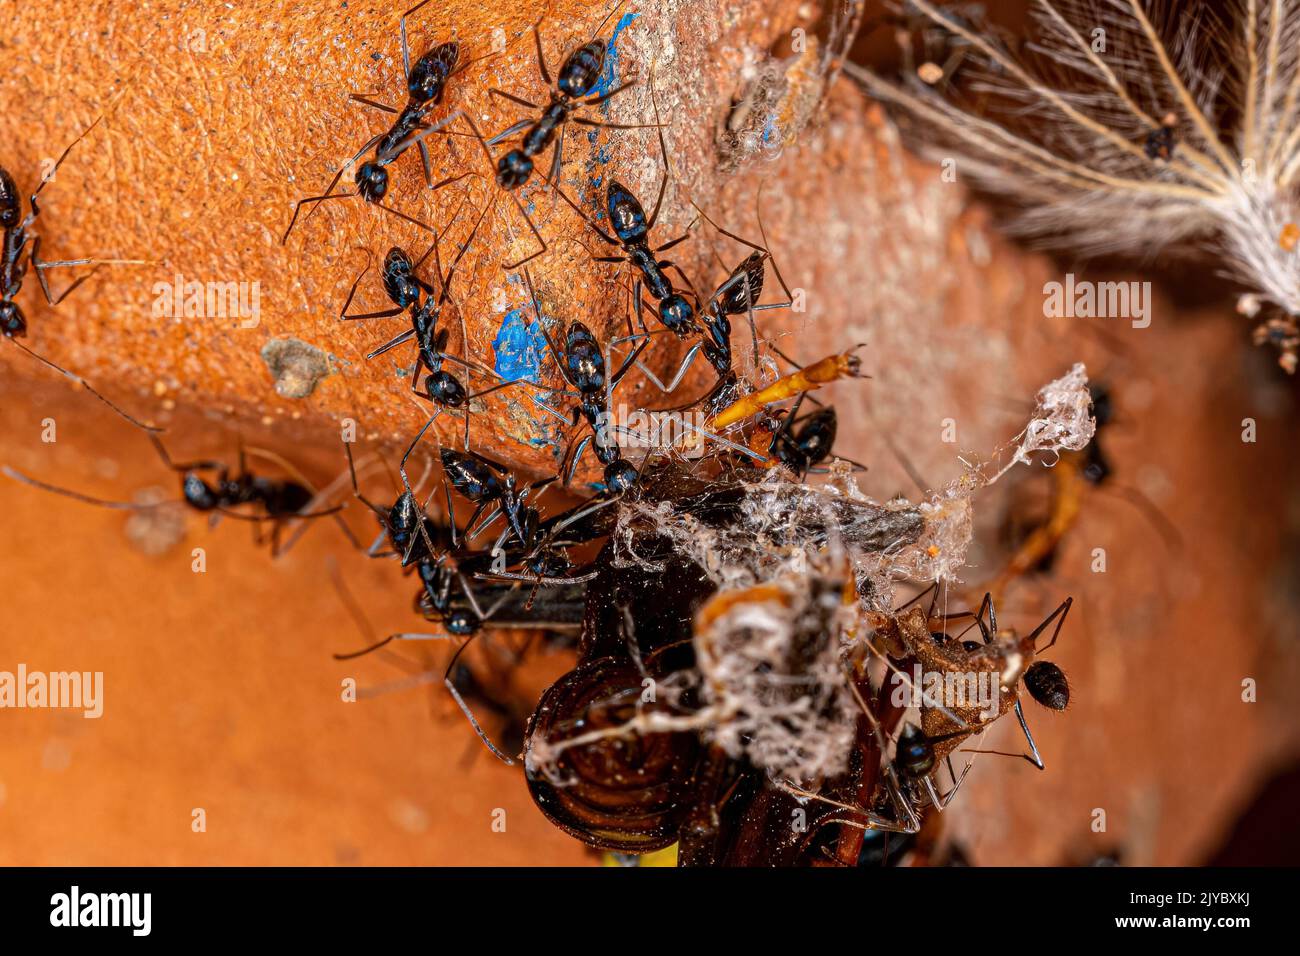 Longhorn Crazy Ants of the species Paratrechina longicornis preying on a Variegated Paper Wasp of the species Polistes versicolor Stock Photo